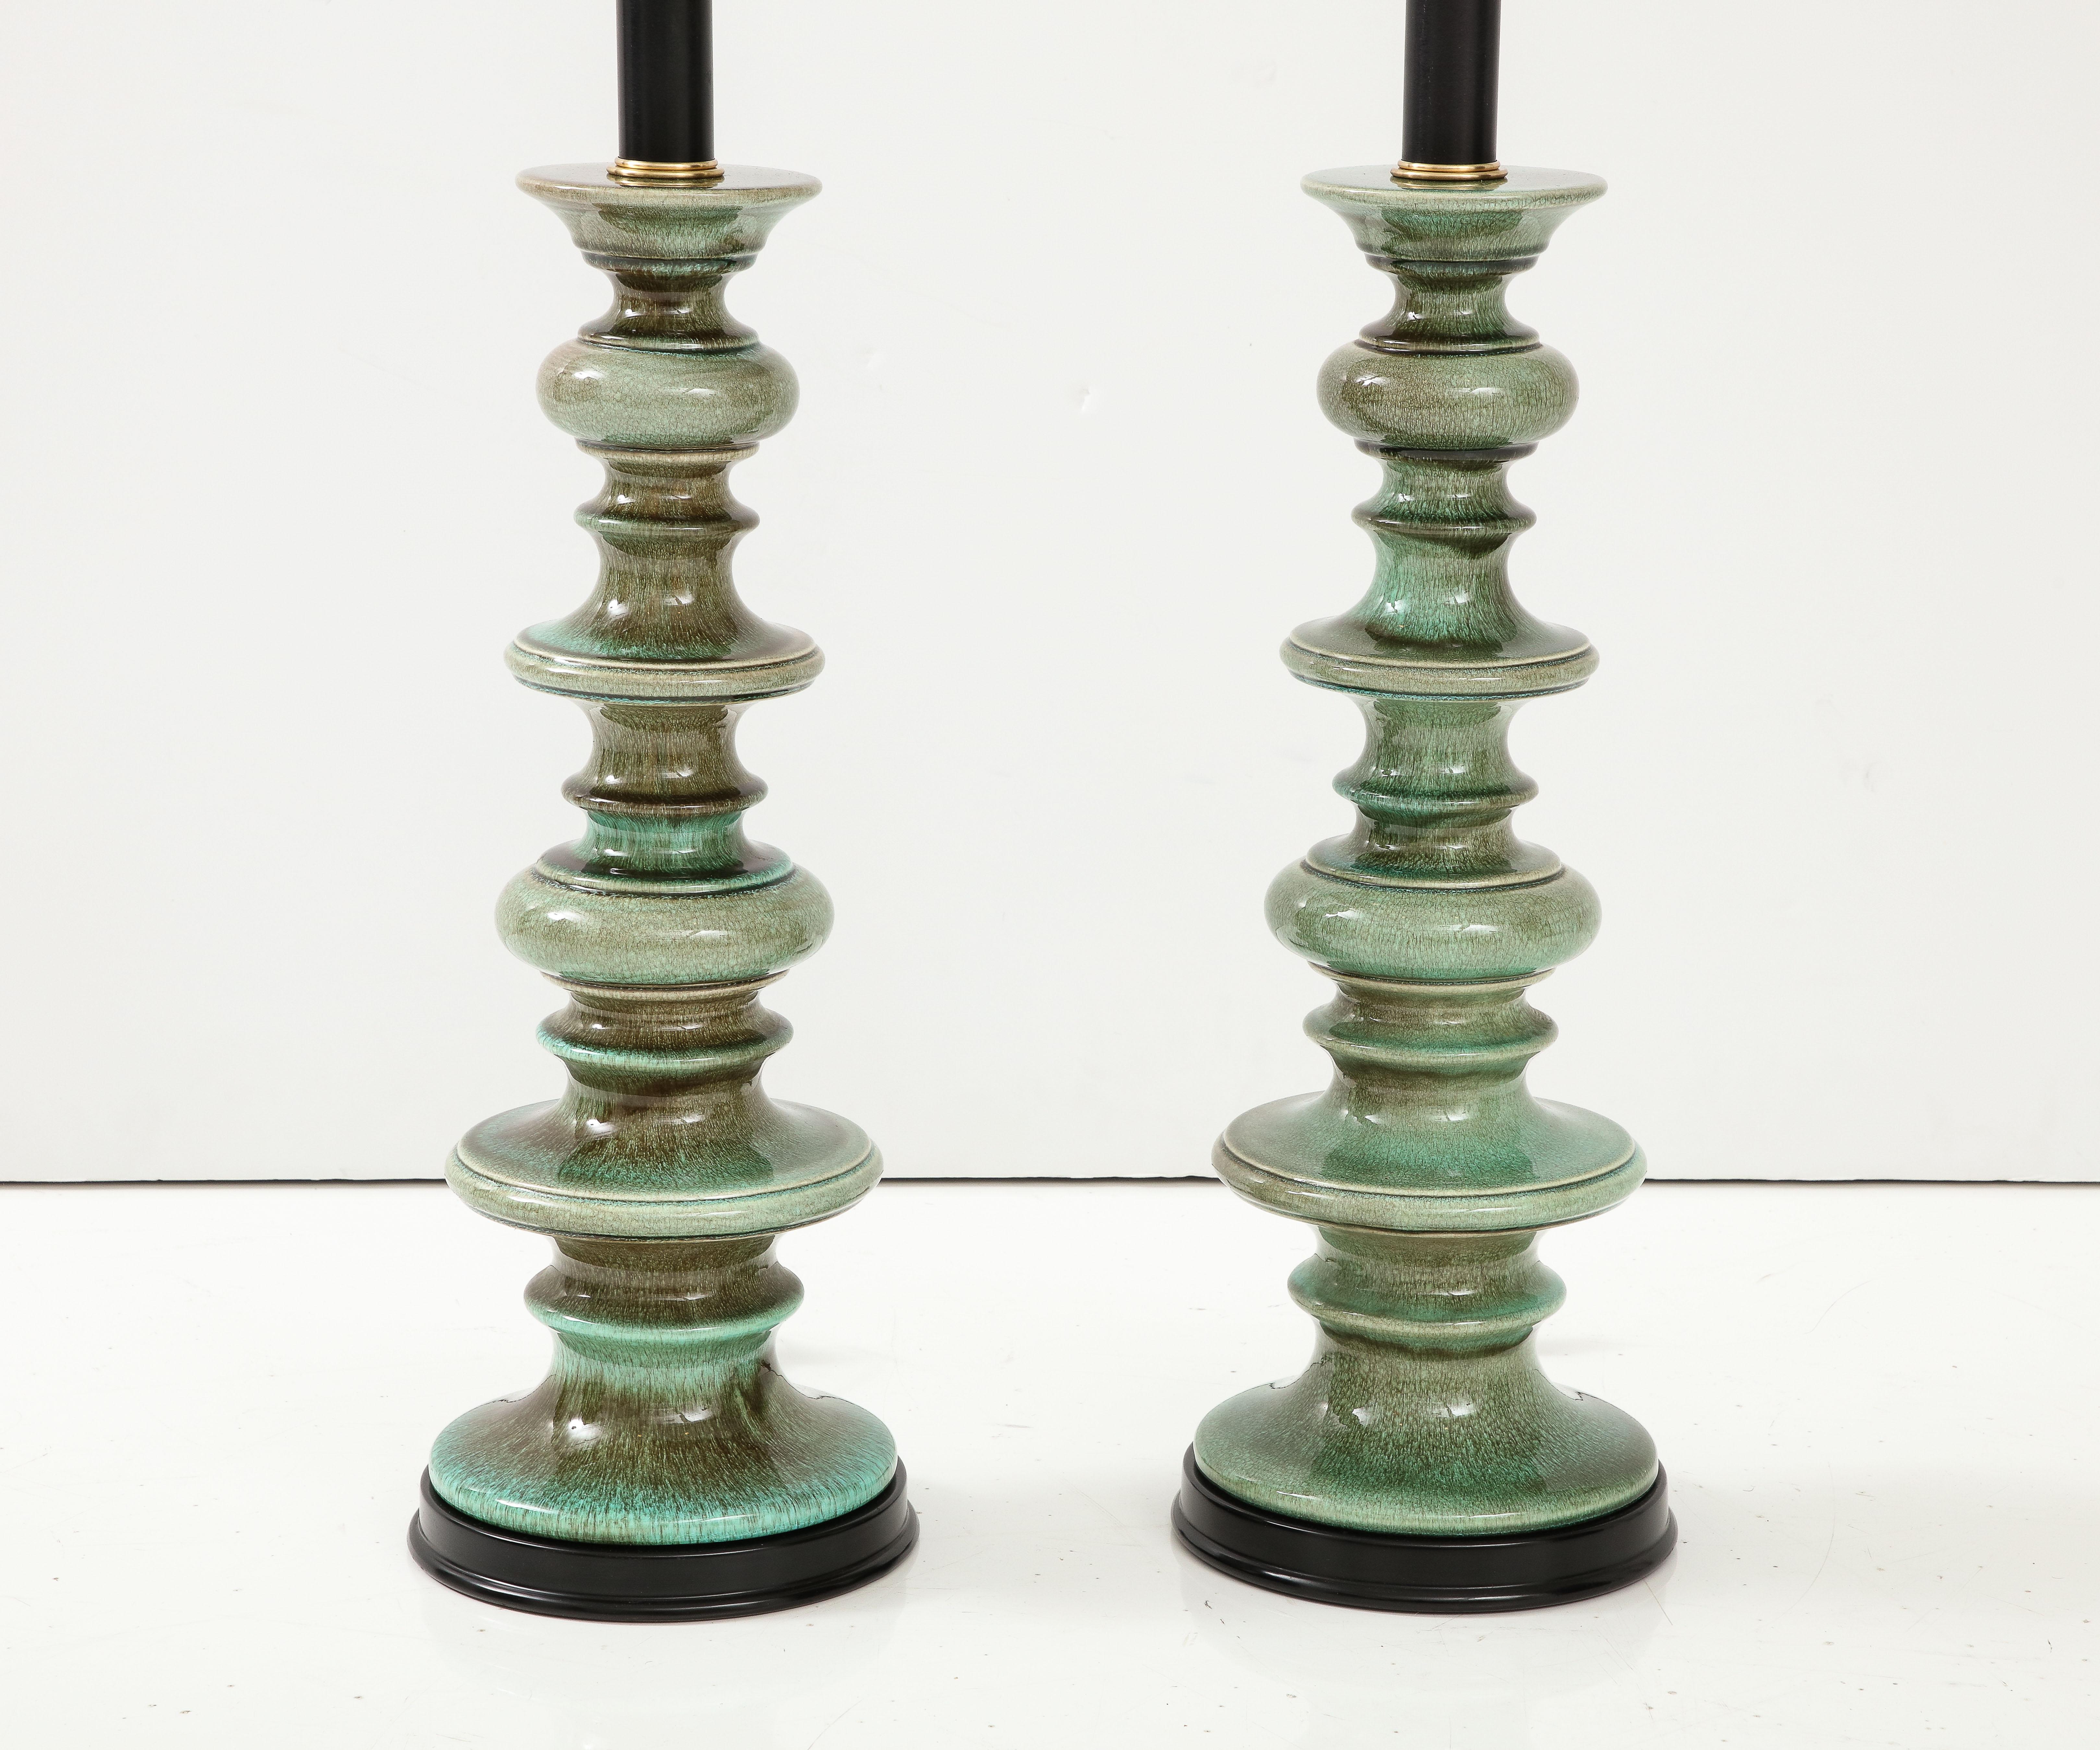 American Pair of Large Ceramic Lamps with a Jade Green Crackle Glaze